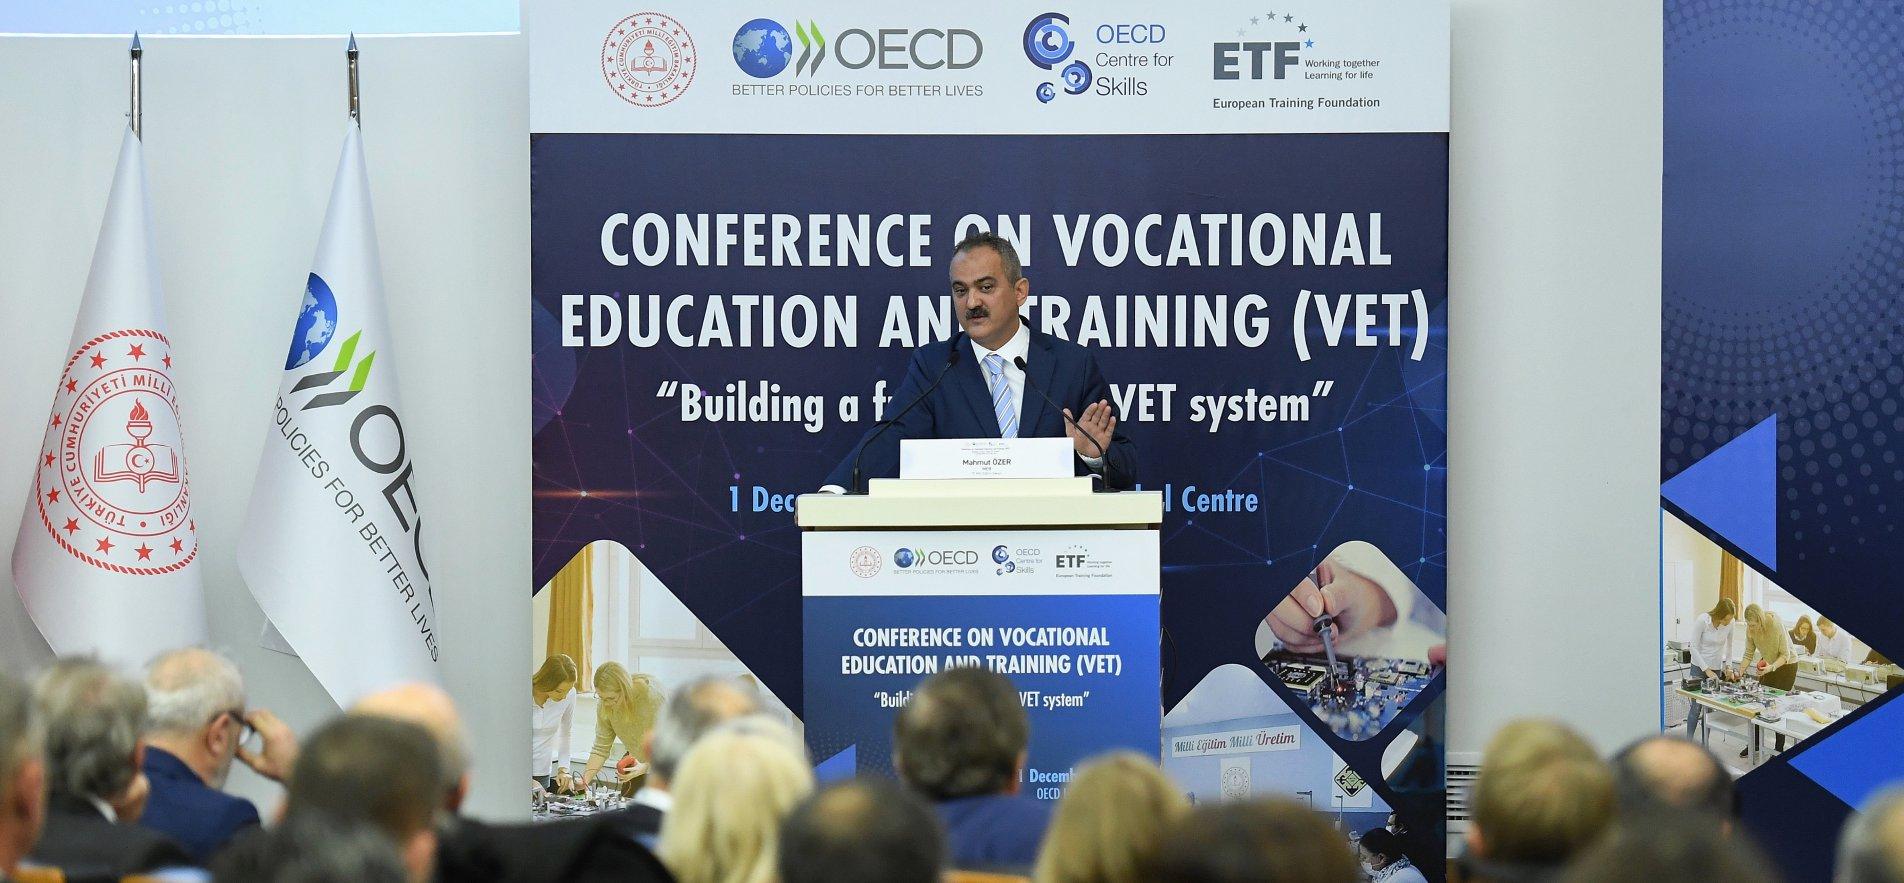 MINISTER ÖZER SHARED VOCATIONAL EDUCATION REFORM AND TÜRKİYE'S EXPERIENCE IN THIS FIELD AT THE OECD VOCATIONAL EDUCATION SUMMIT HELD IN İSTANBUL